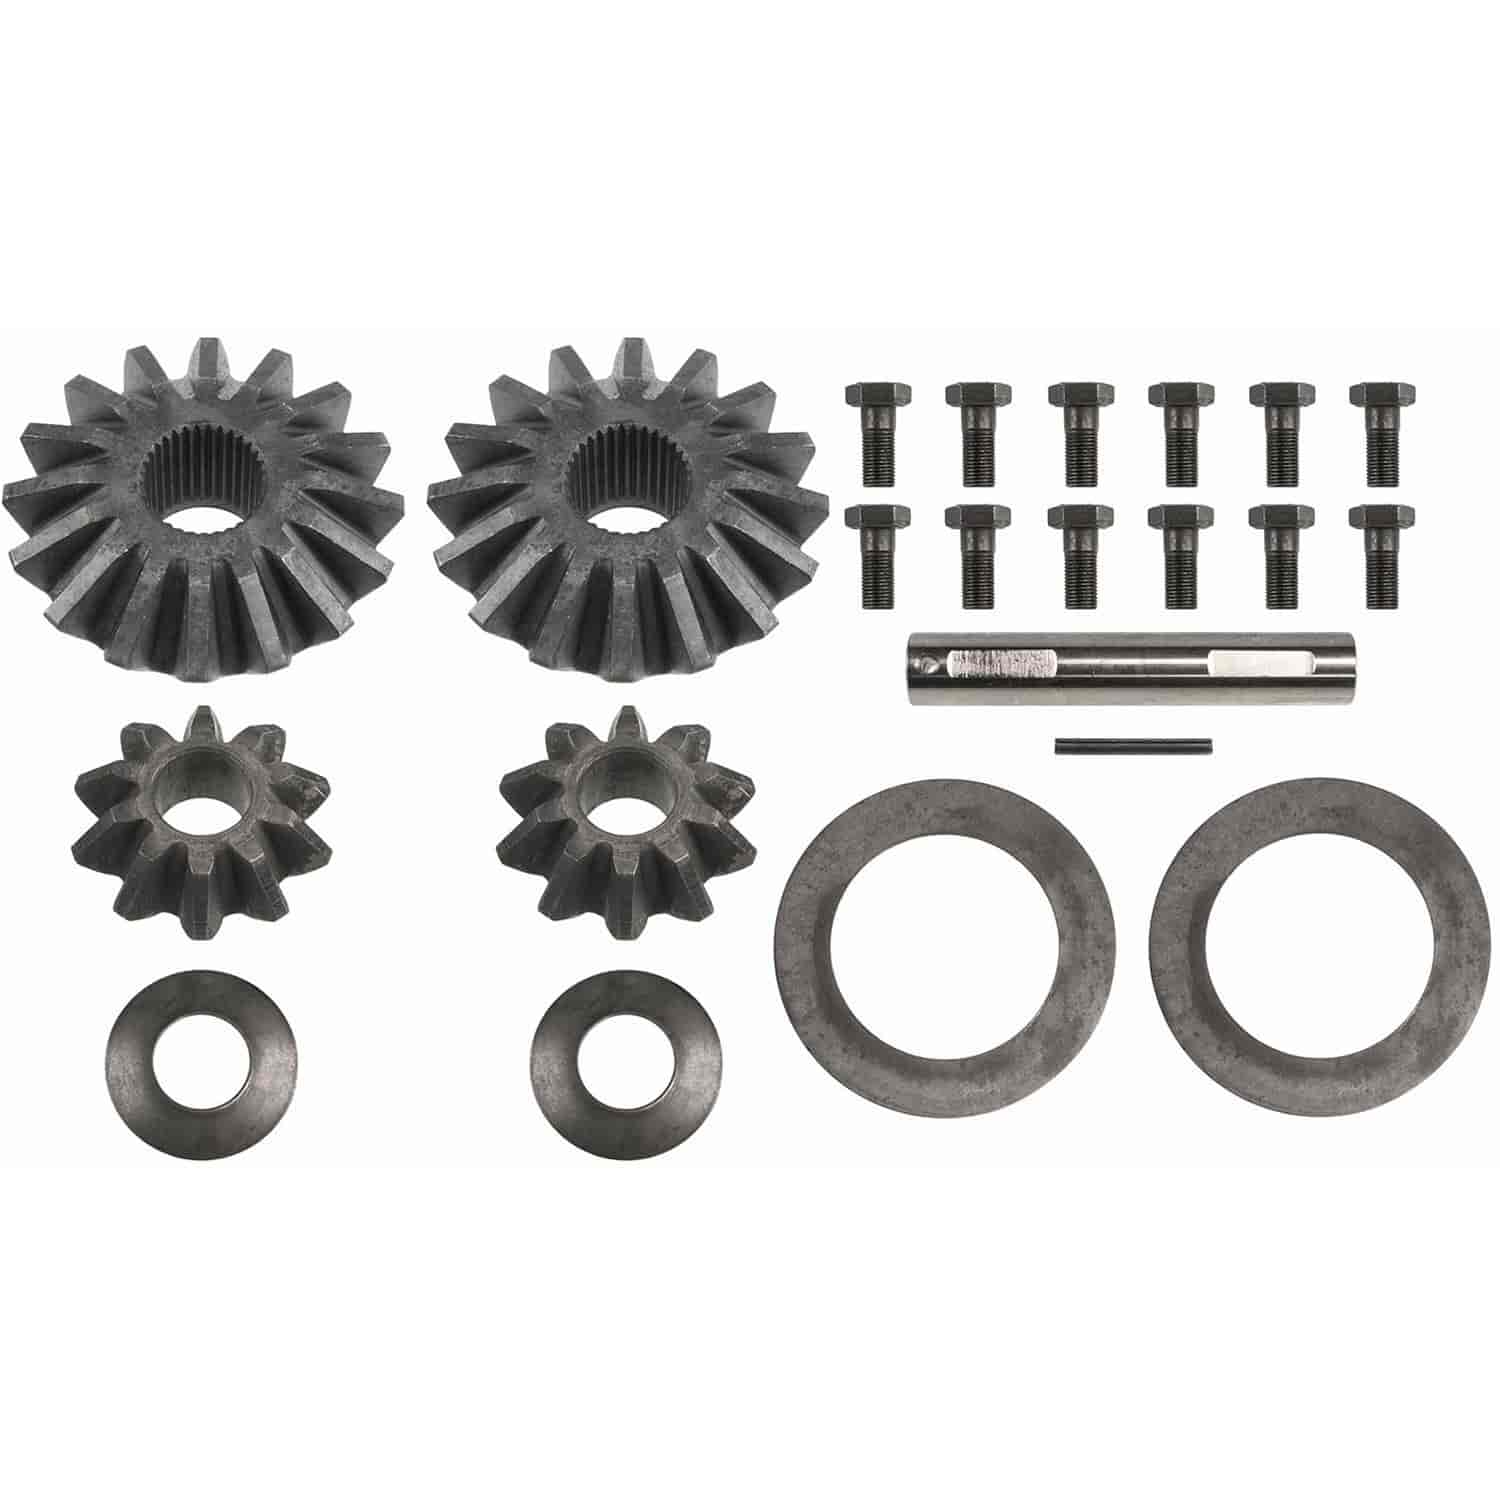 Open Differential Internal Kit Incl. Side And Pinion Gears/Washers/Pinion Shaft And Lock Bolt Or Roll Pin